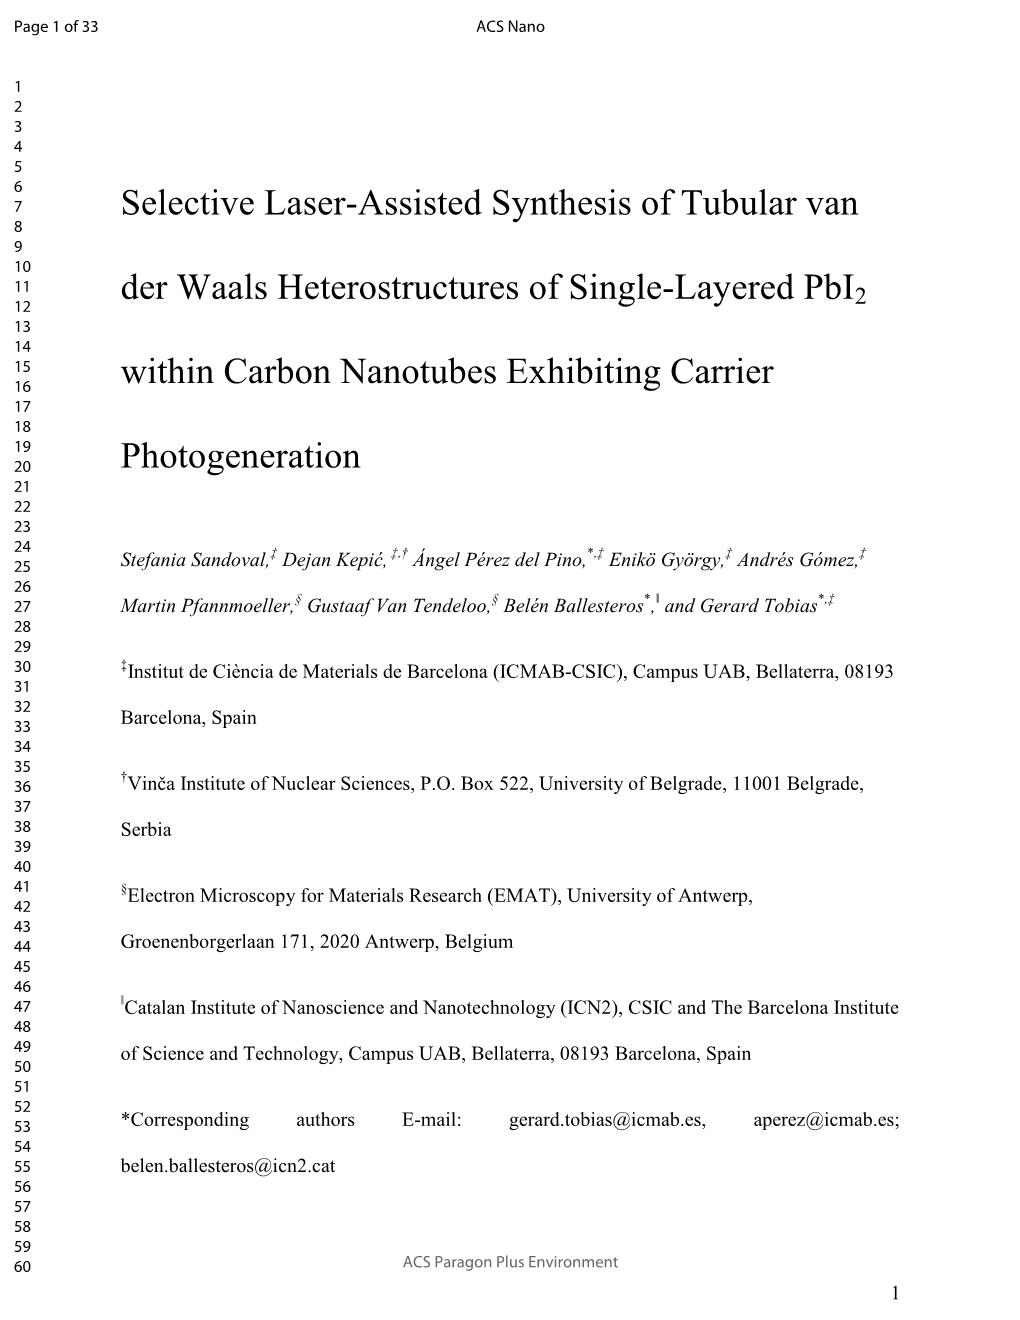 Selective Laser-Assisted Synthesis of Tubular Van Der Waals